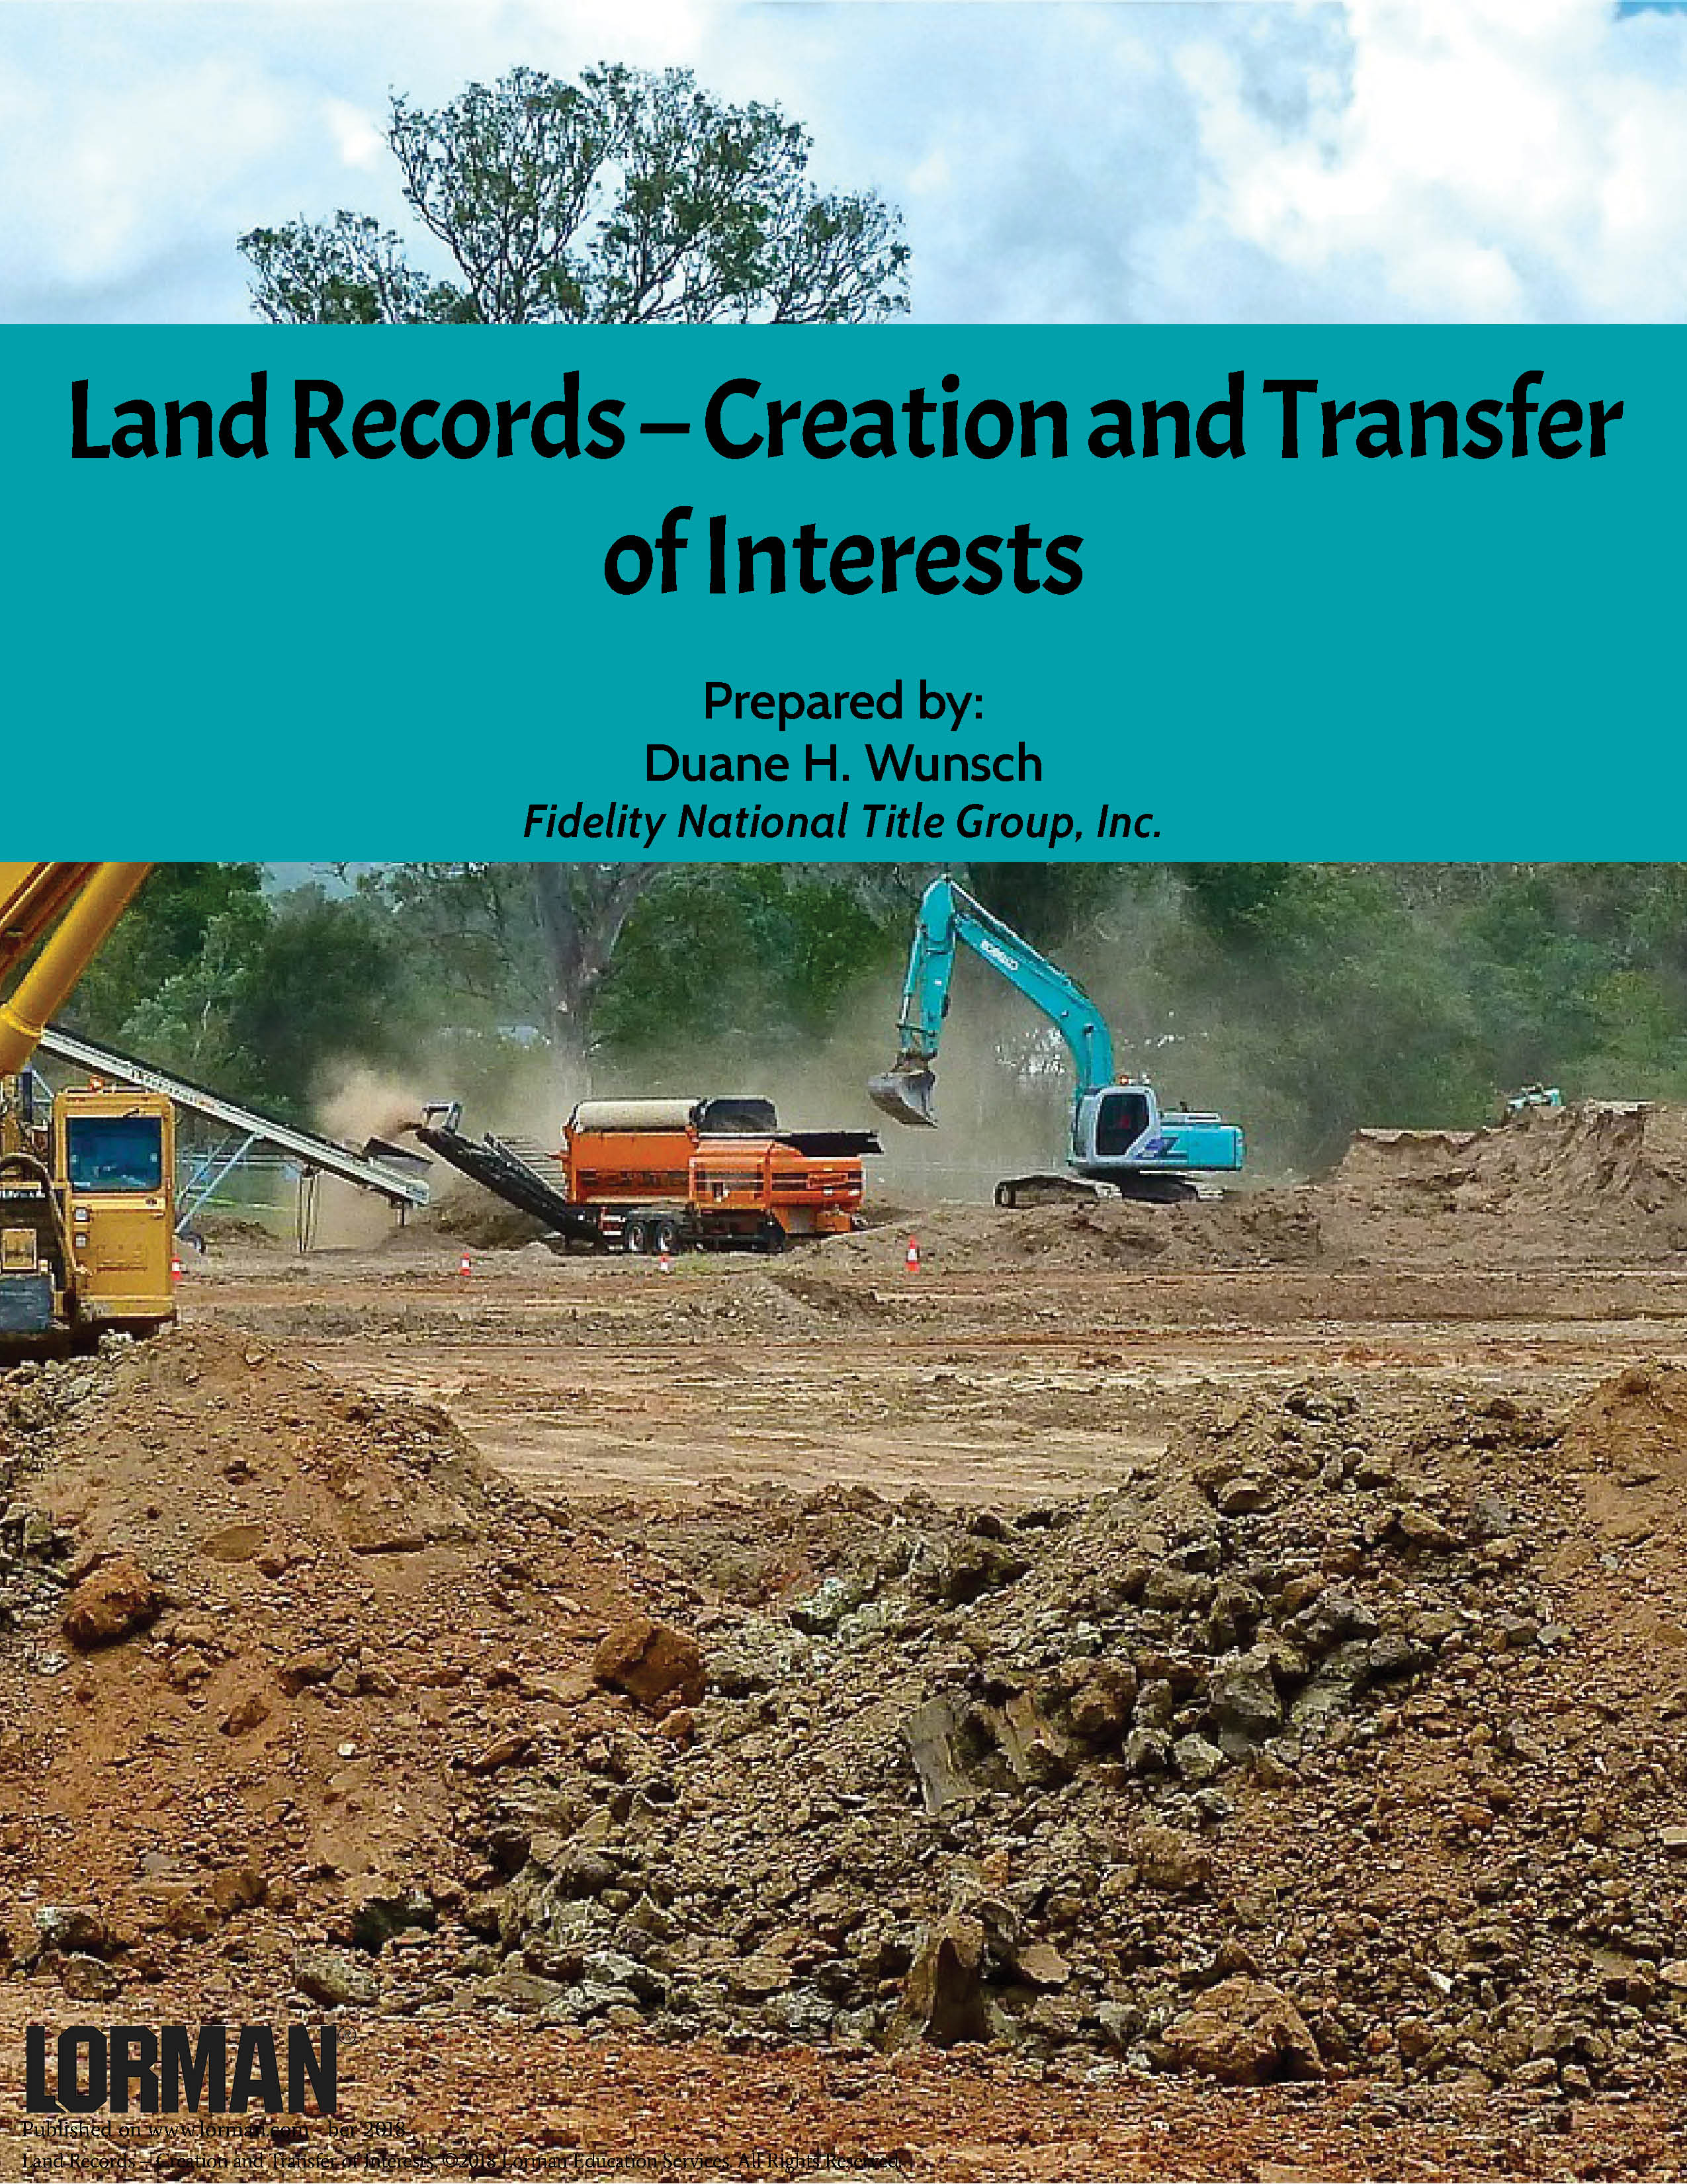 Land Records – Creation and Transfer of Interests